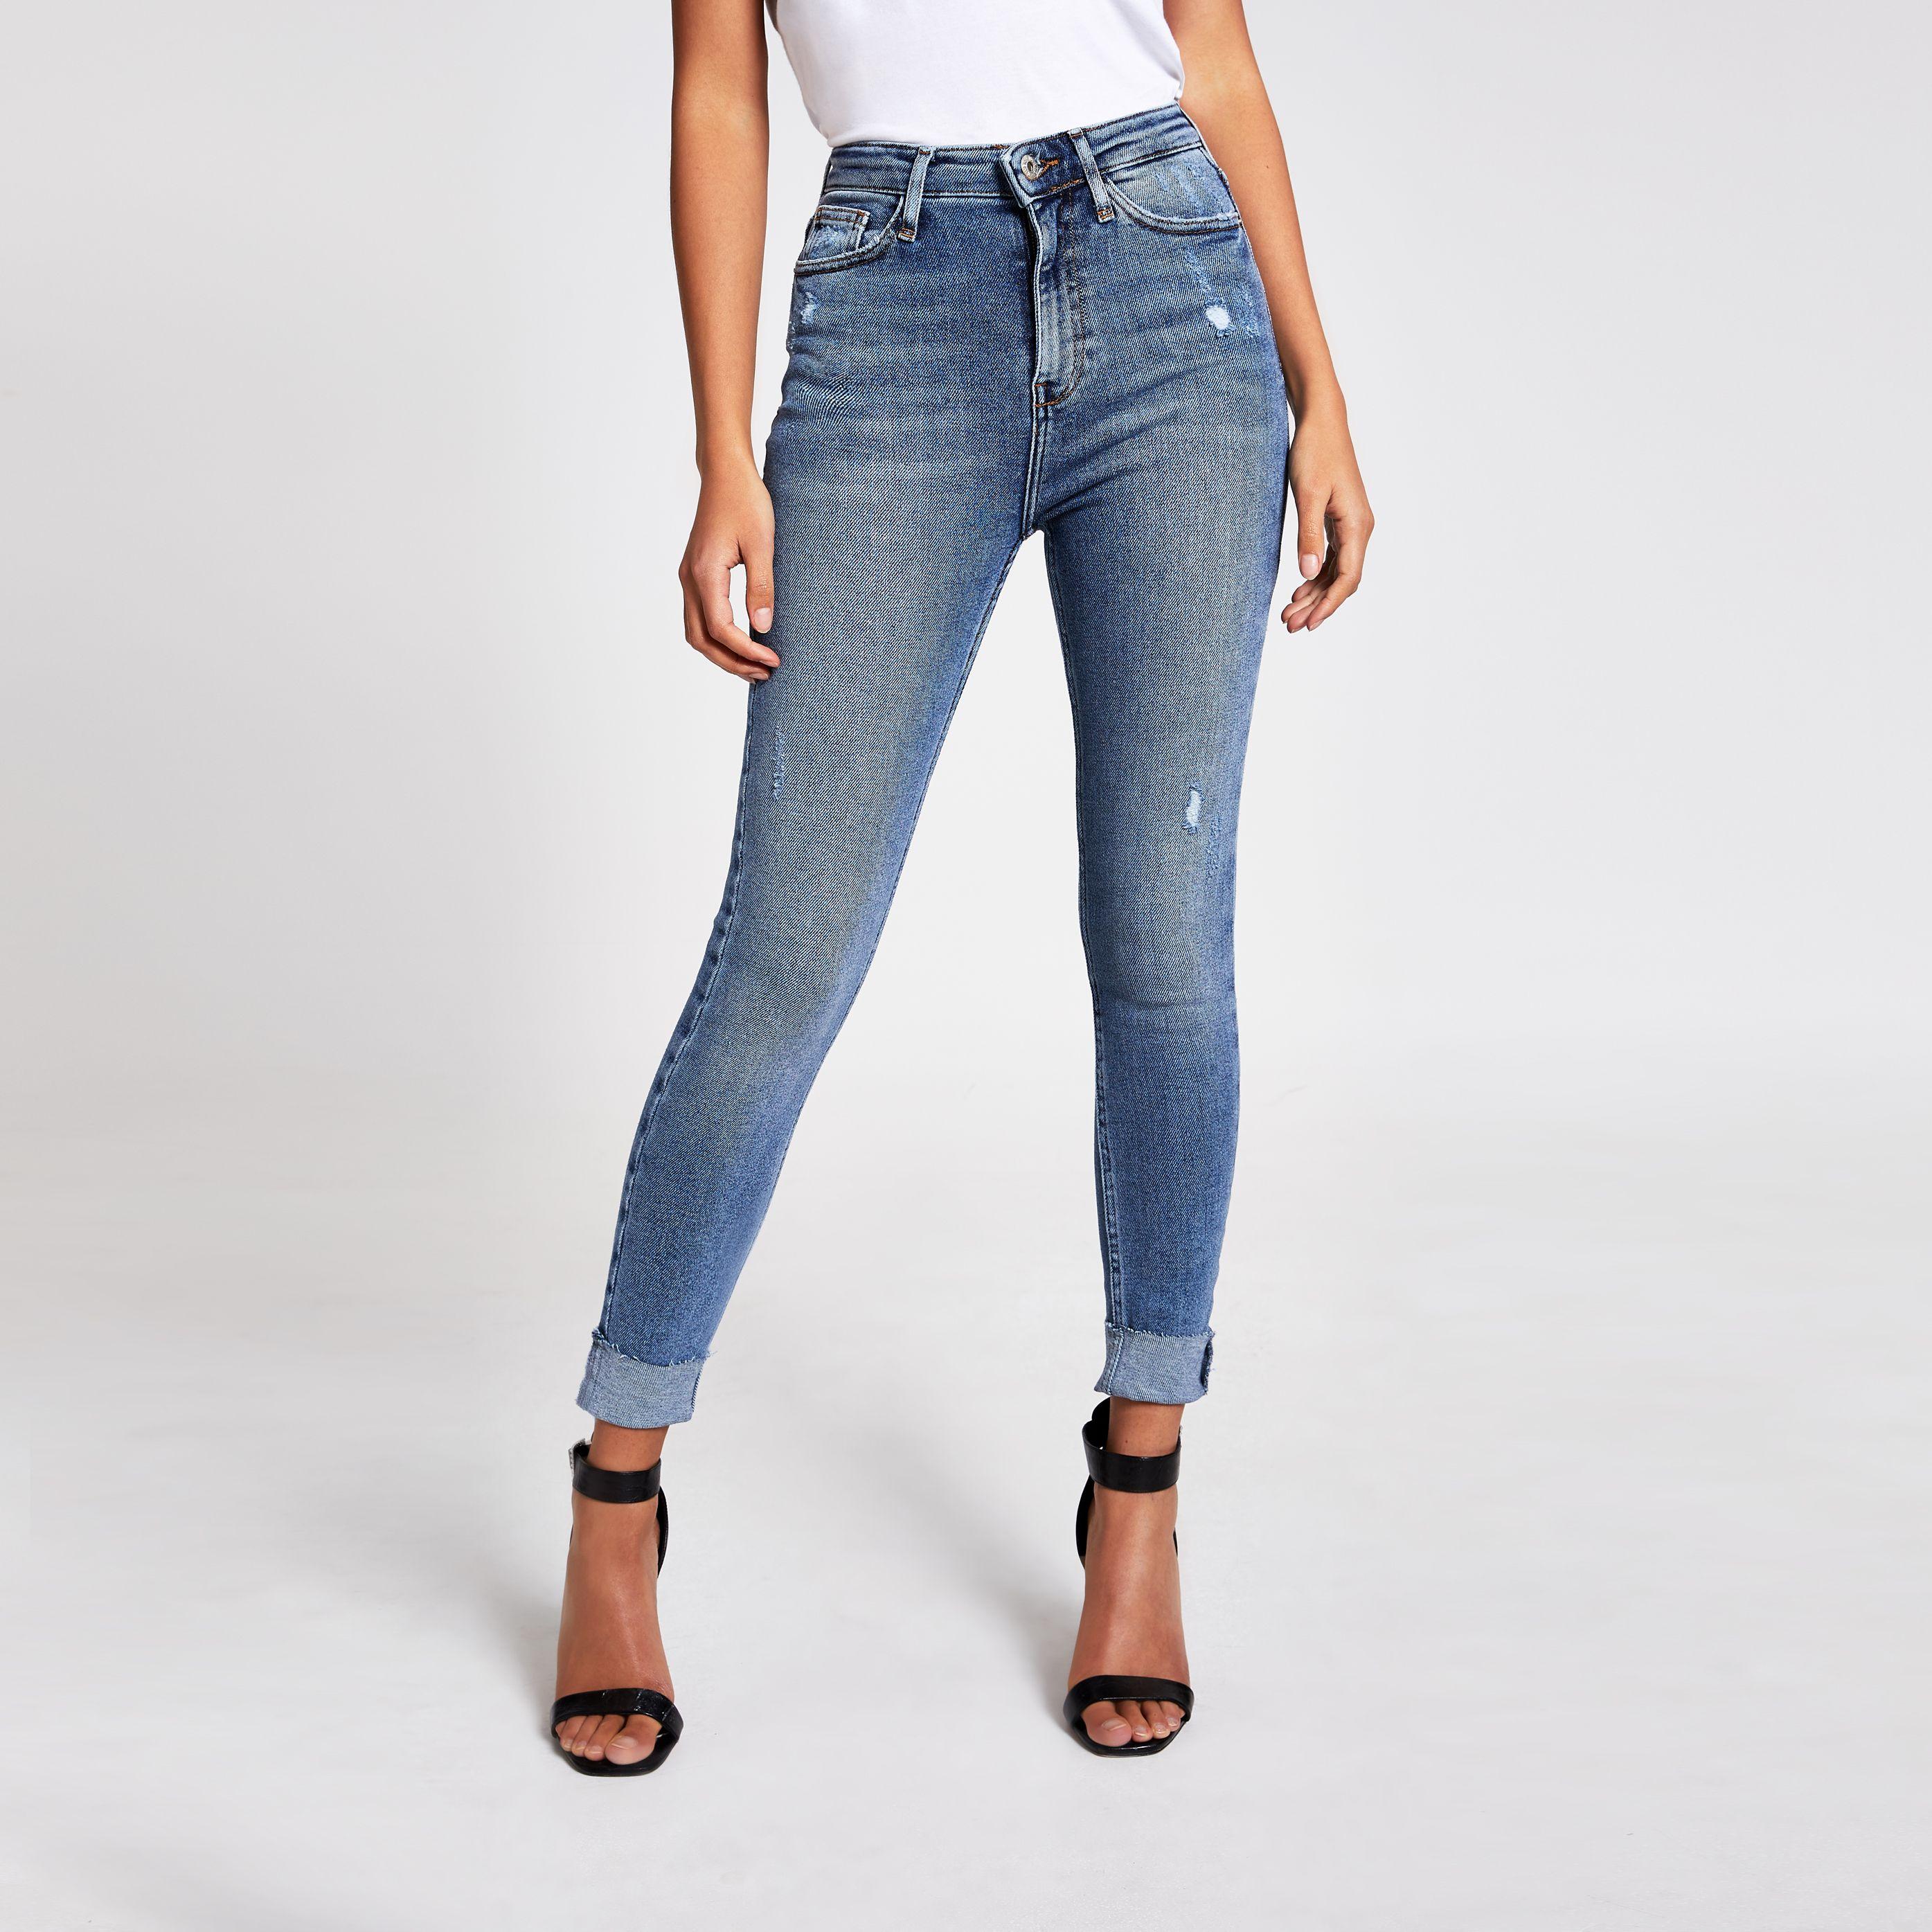 River Island Hailey High Rise Skinny Jeans in Blue | Lyst UK